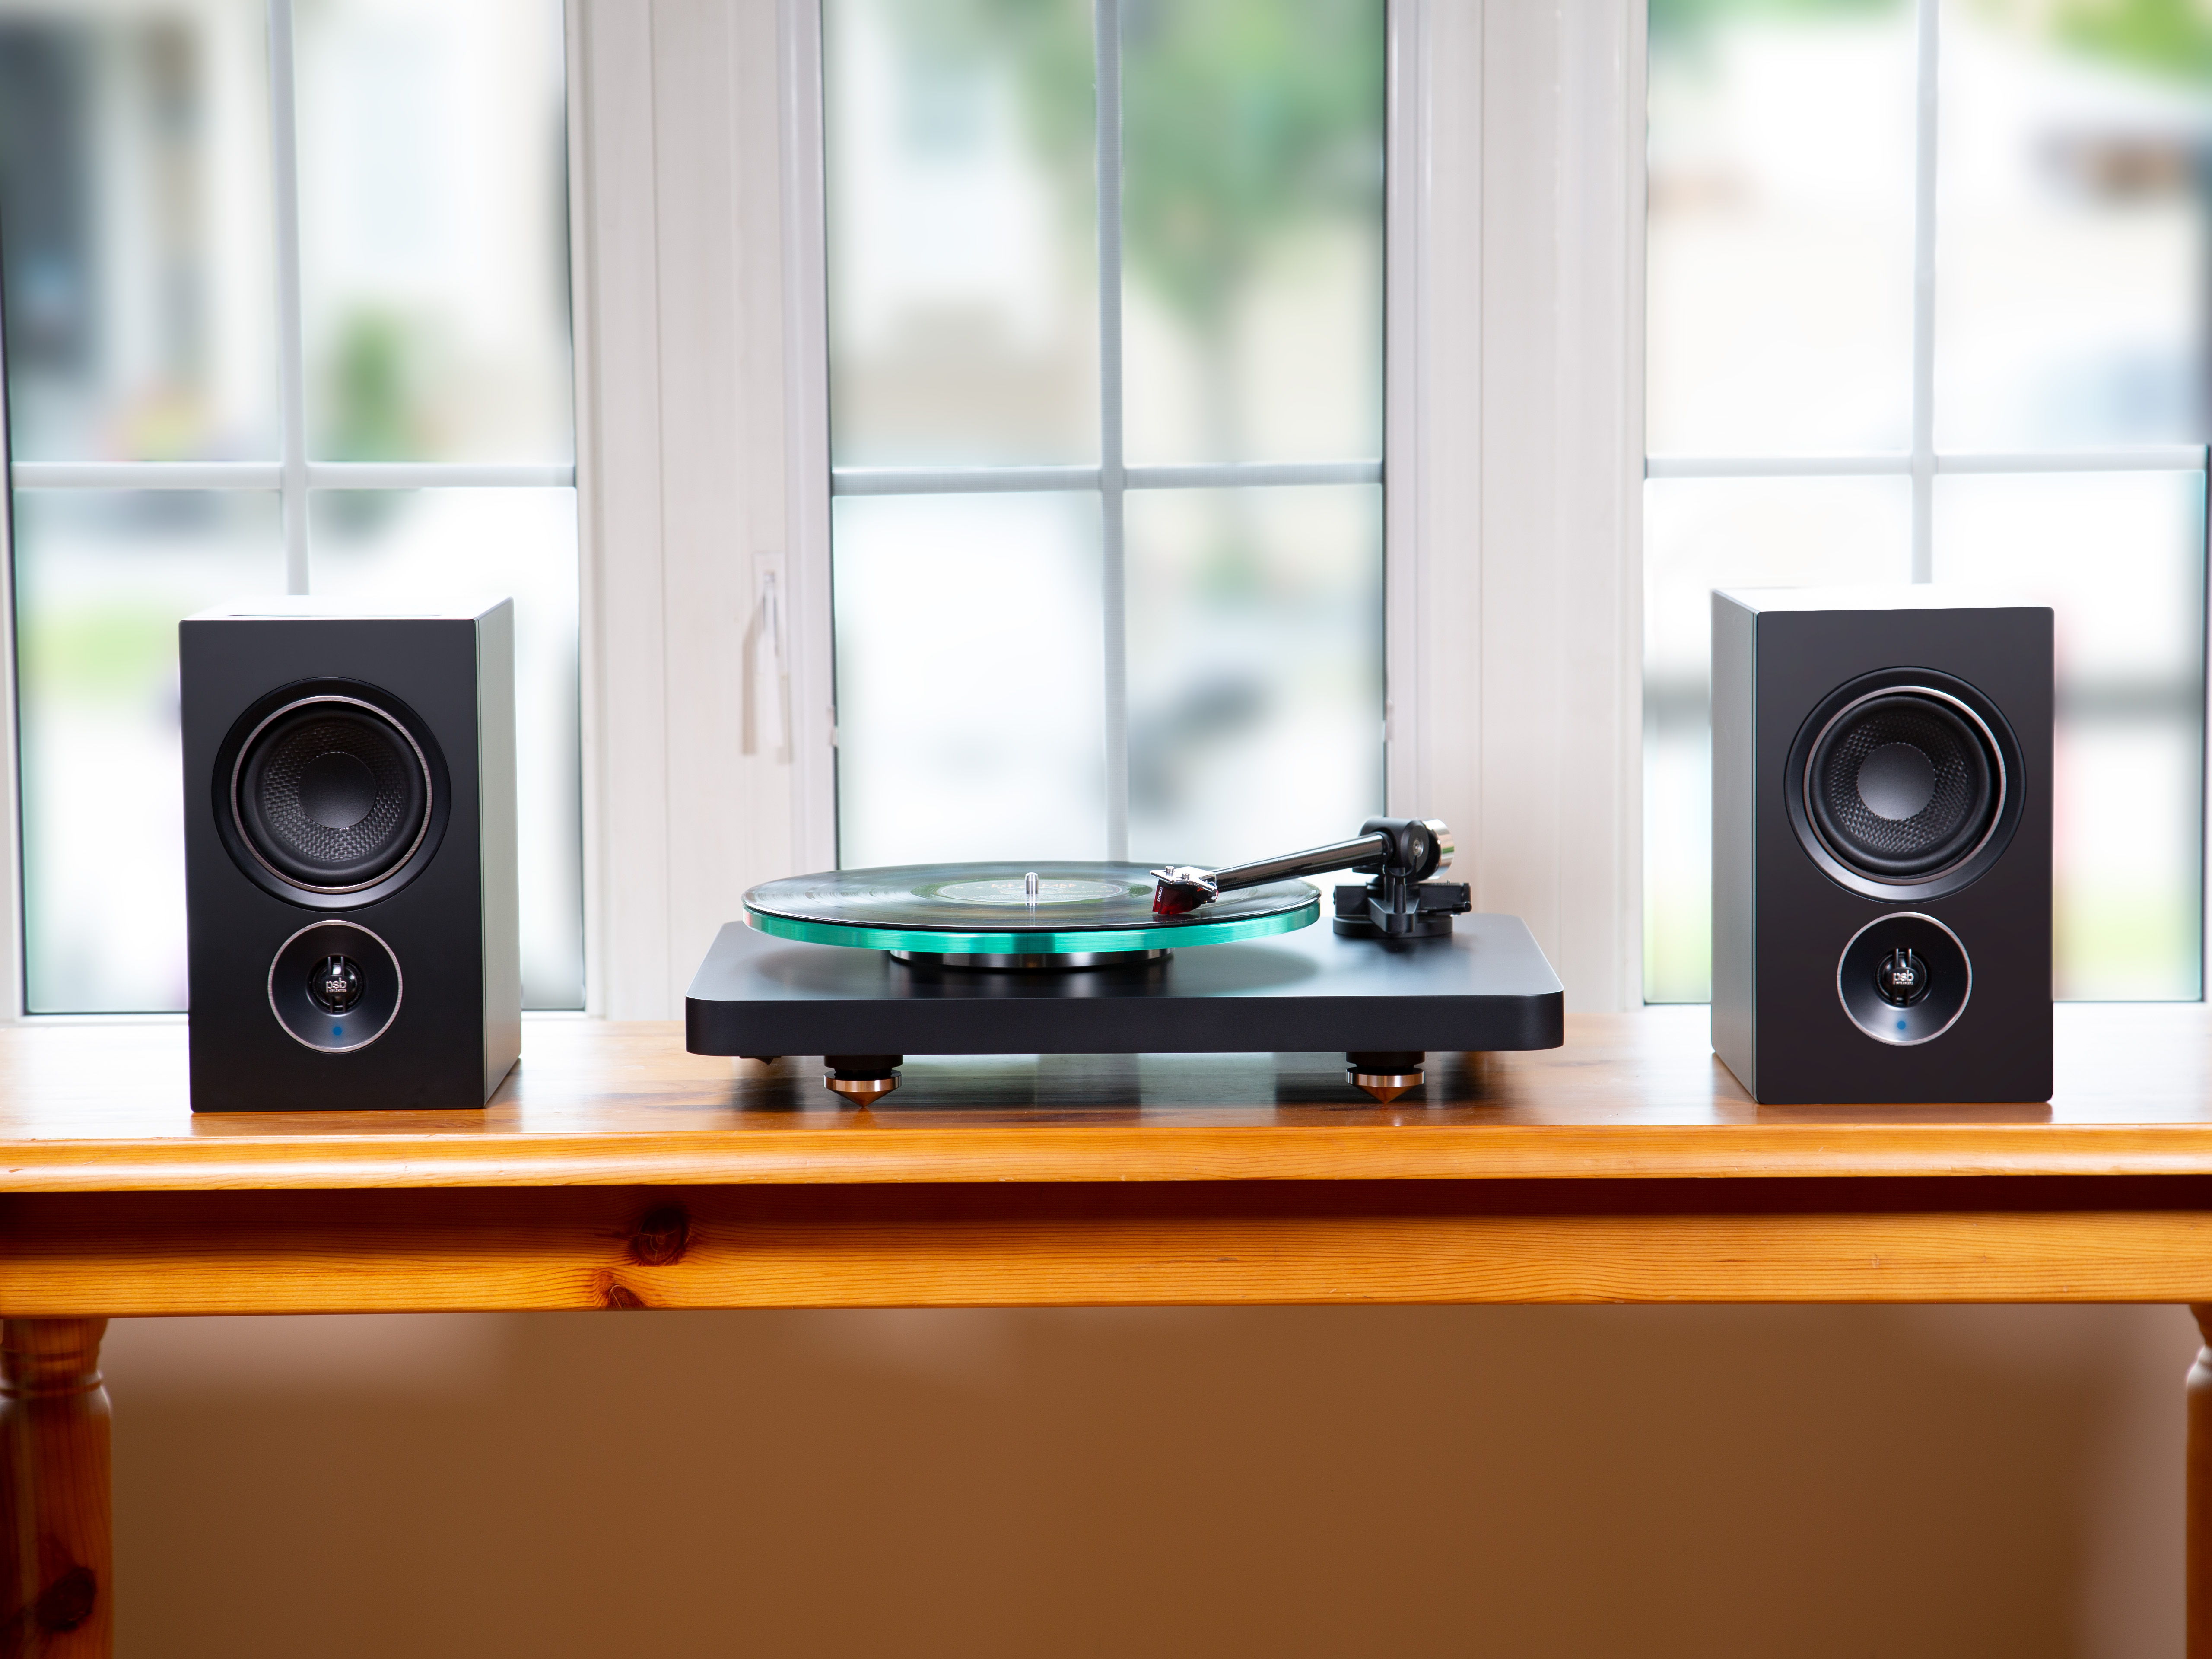 The Alpha iQ's between a turntable